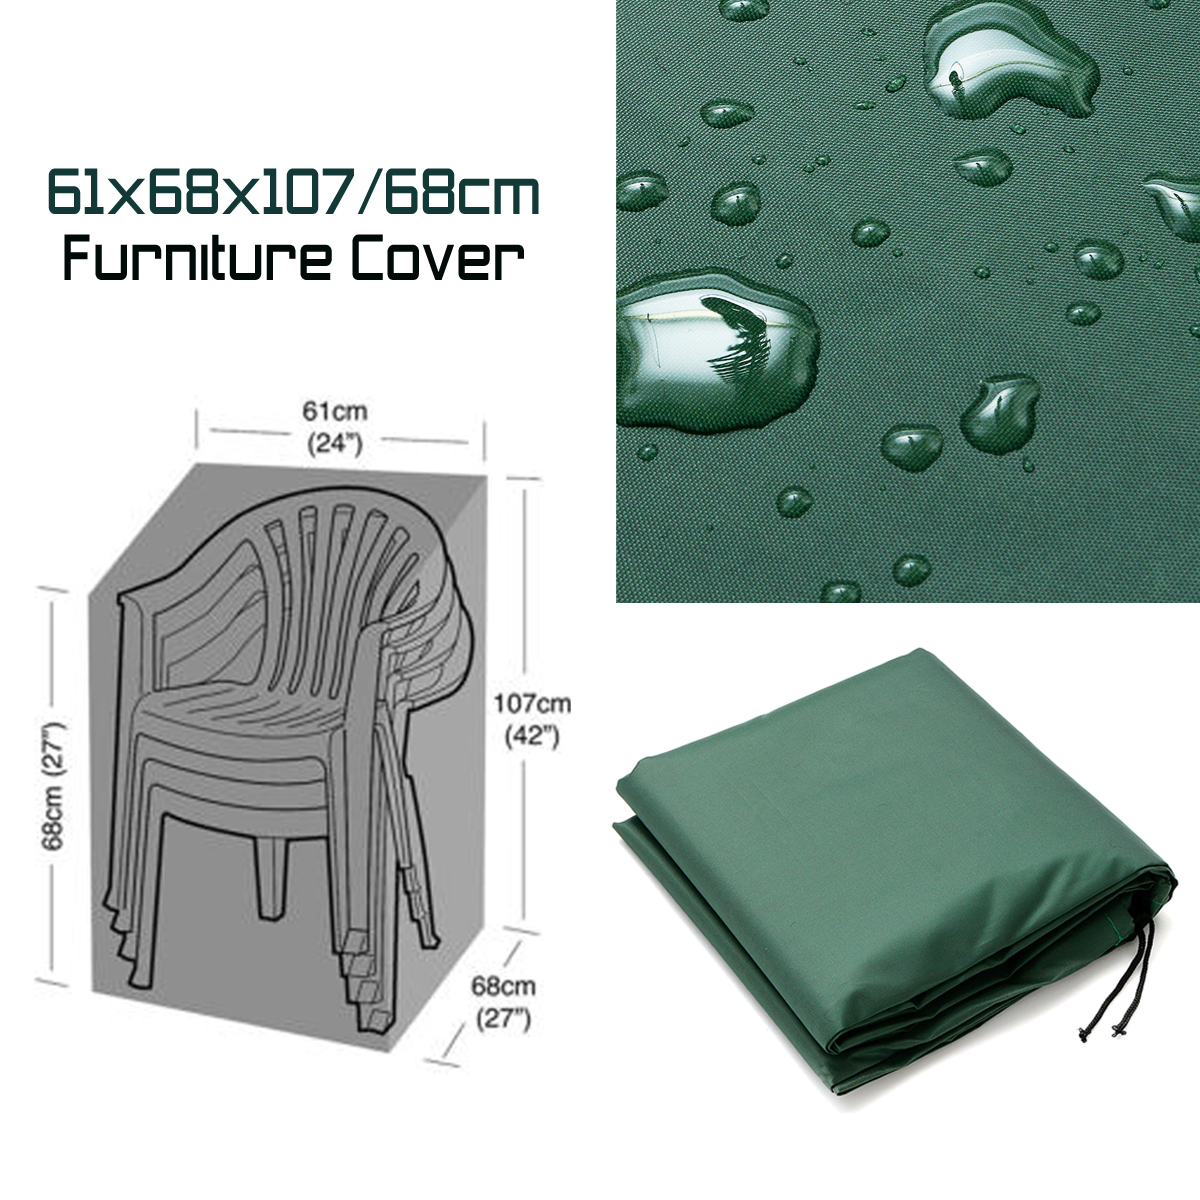 Household Chair Outdoor Stacking Chair Cover Garden Park Patio Chair Furniture Waterproof  70x70x125cmx75cm - image 2 of 6